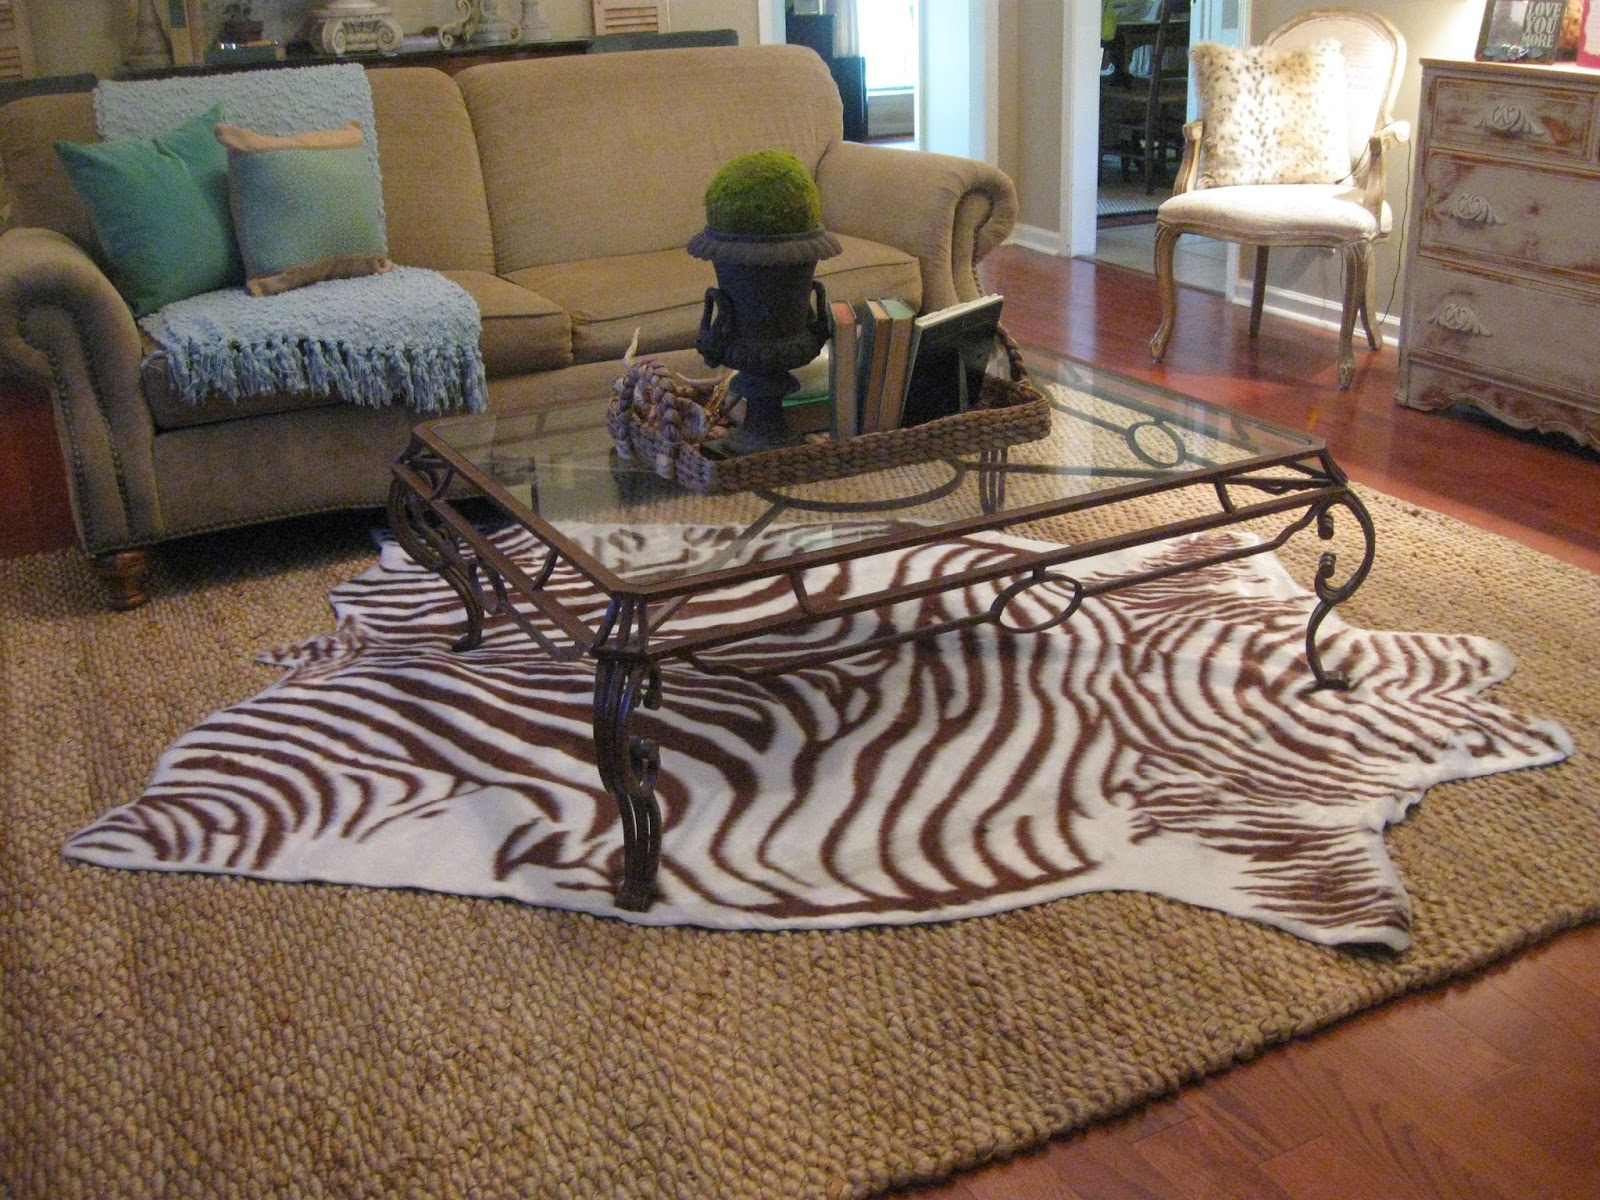 GRACIOUS SOUTHERN LIVING: New Rugs for Den